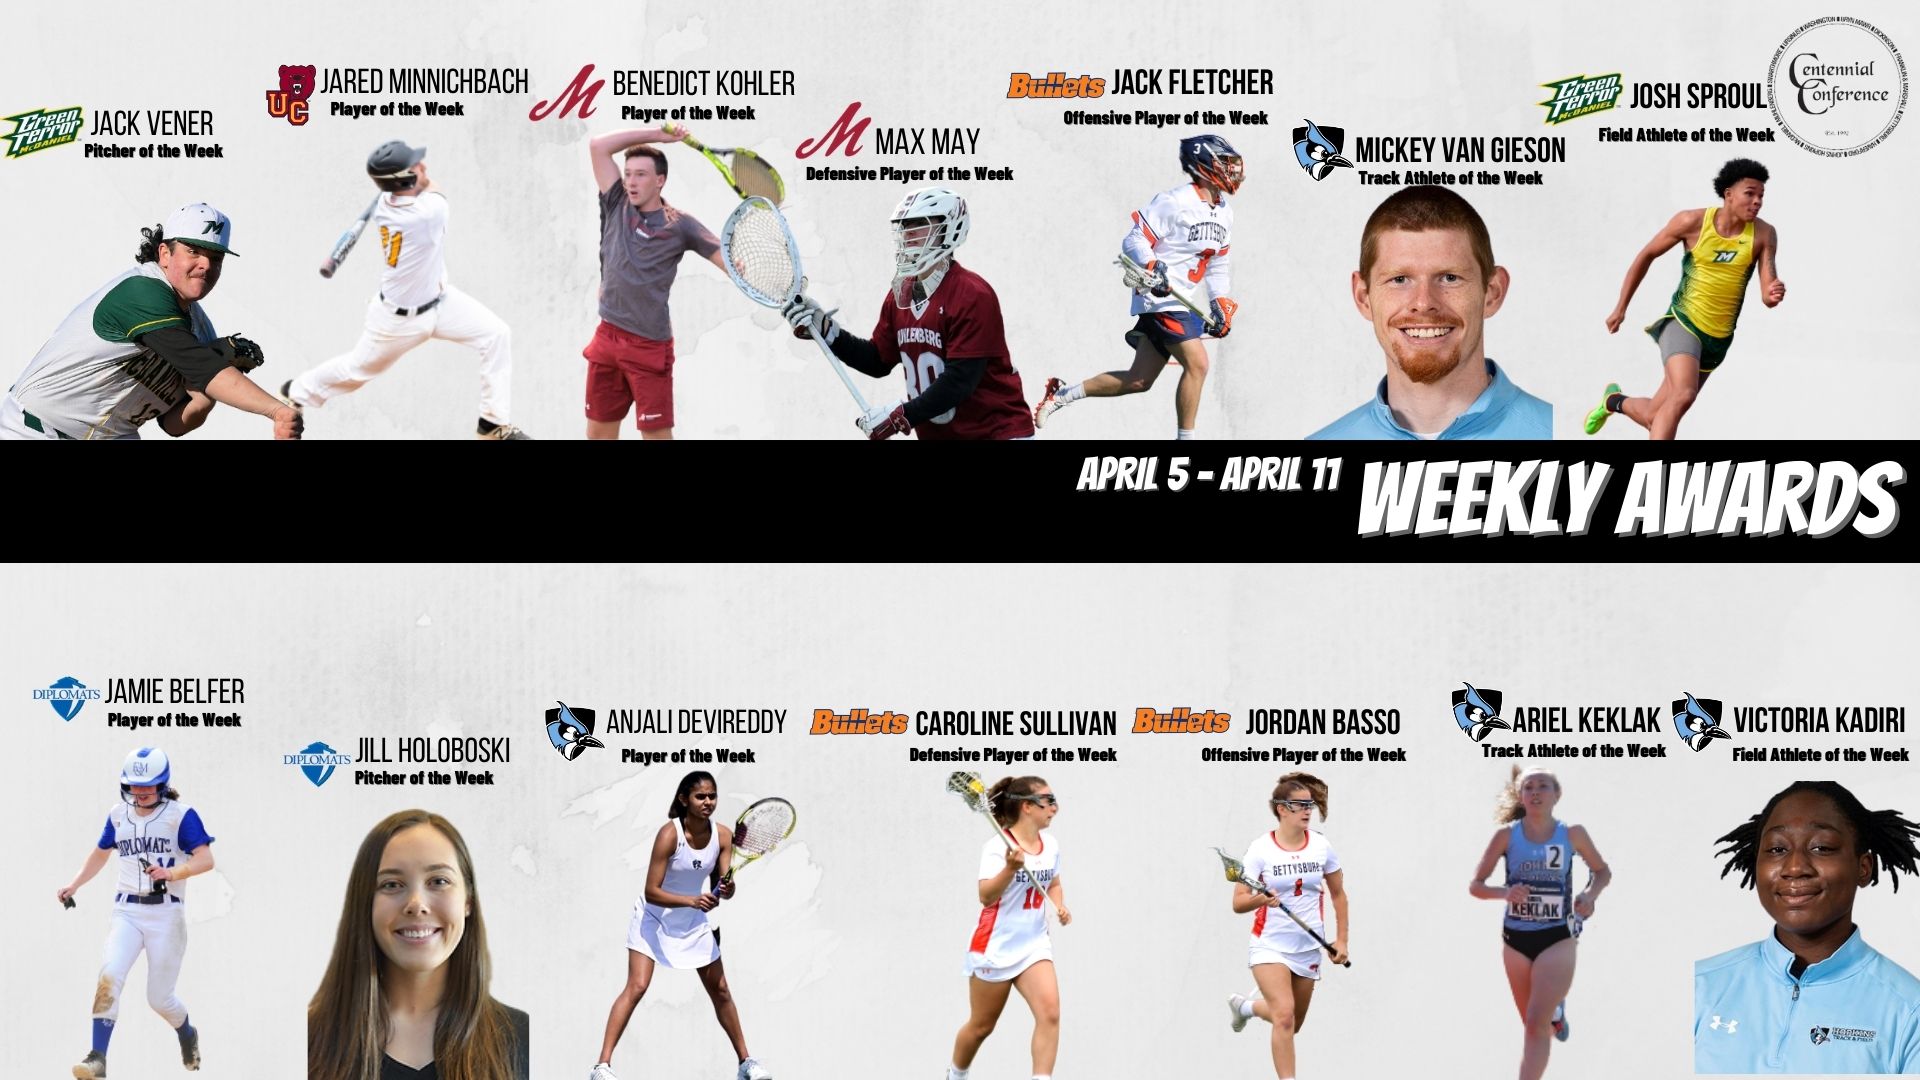 Centennial Conference Athletes of the Week - Apr. 5-11